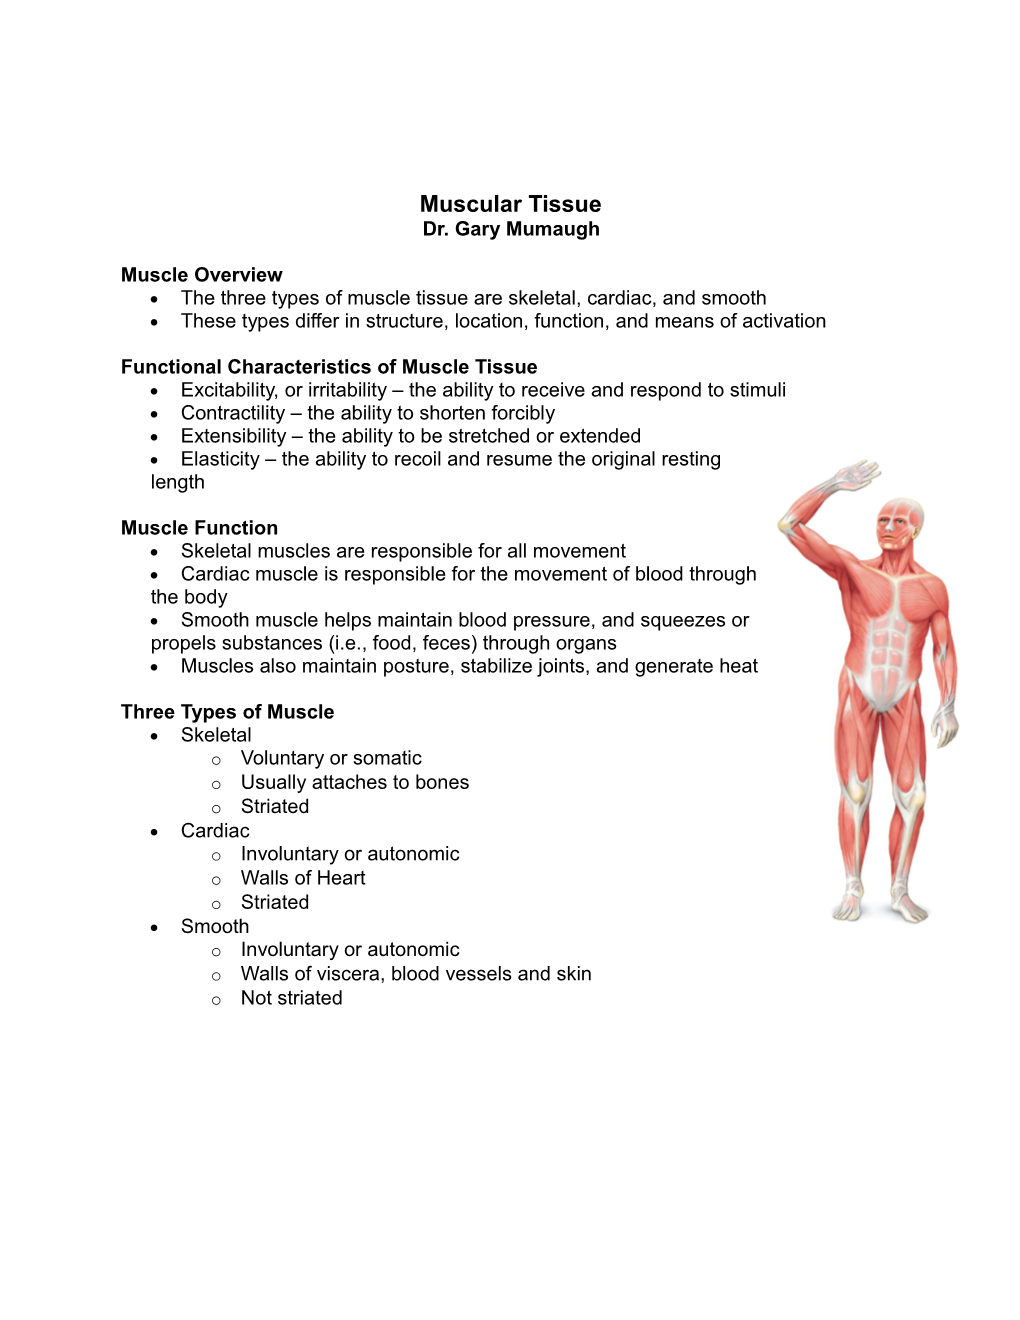 Functional Characteristics of Muscle Tissue